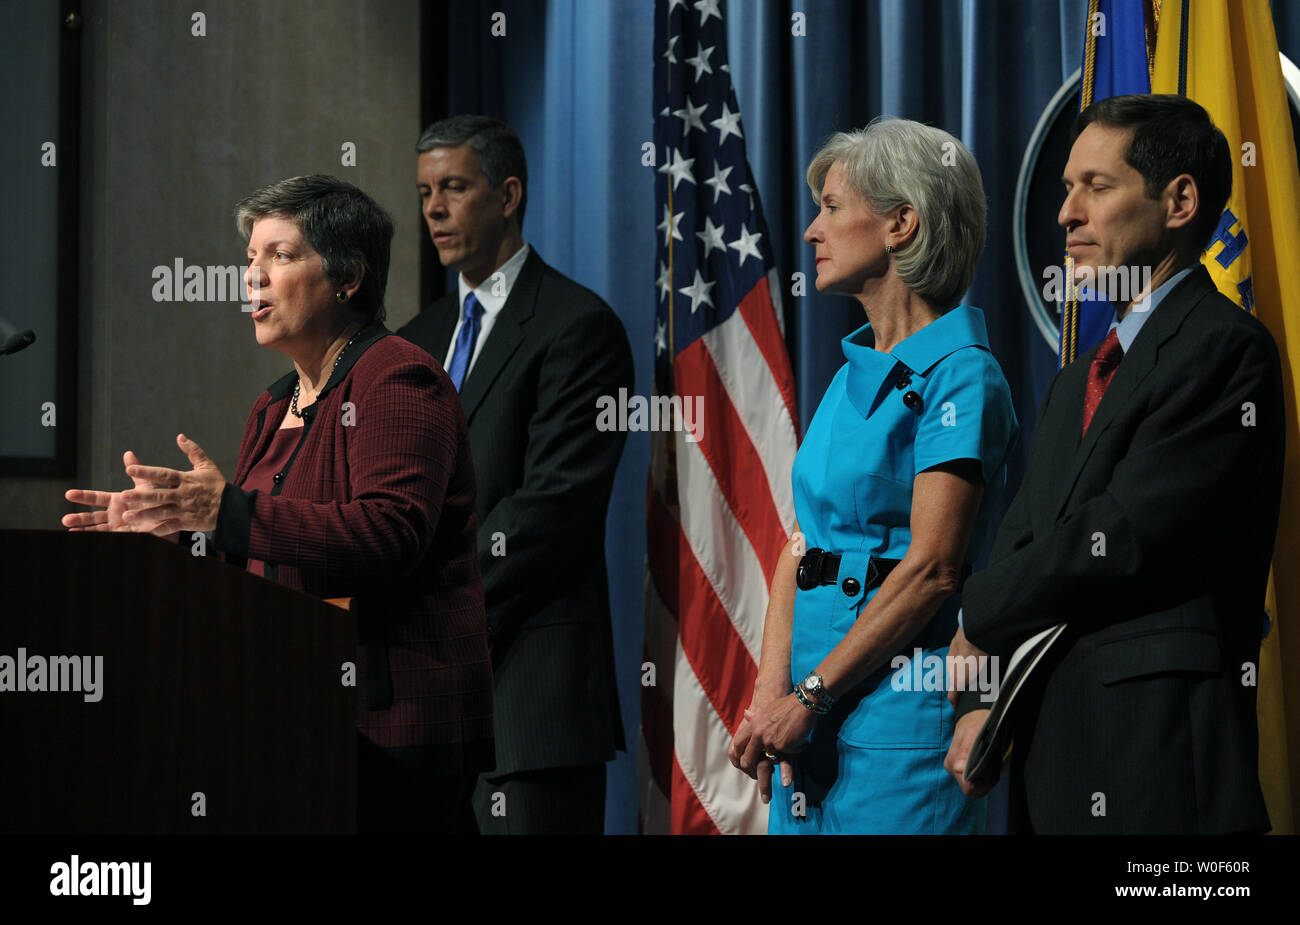 Secretary of Homeland Security Janet Napolitano speaks during a news conference to release updated guidance for schools during the upcoming influenza season, particularly regarding the H1N1 Flu Virus, at HHS headquarters in Washington on August 7, 2009. She is joined by Education Secretary Arne Duncan, Secretary of Health and Human Services Kathleen Sebelius, and Centers for Disease Control and Prevention Director Thomas Frieden.   UPI Photo/Roger L. Wollenberg Stock Photo